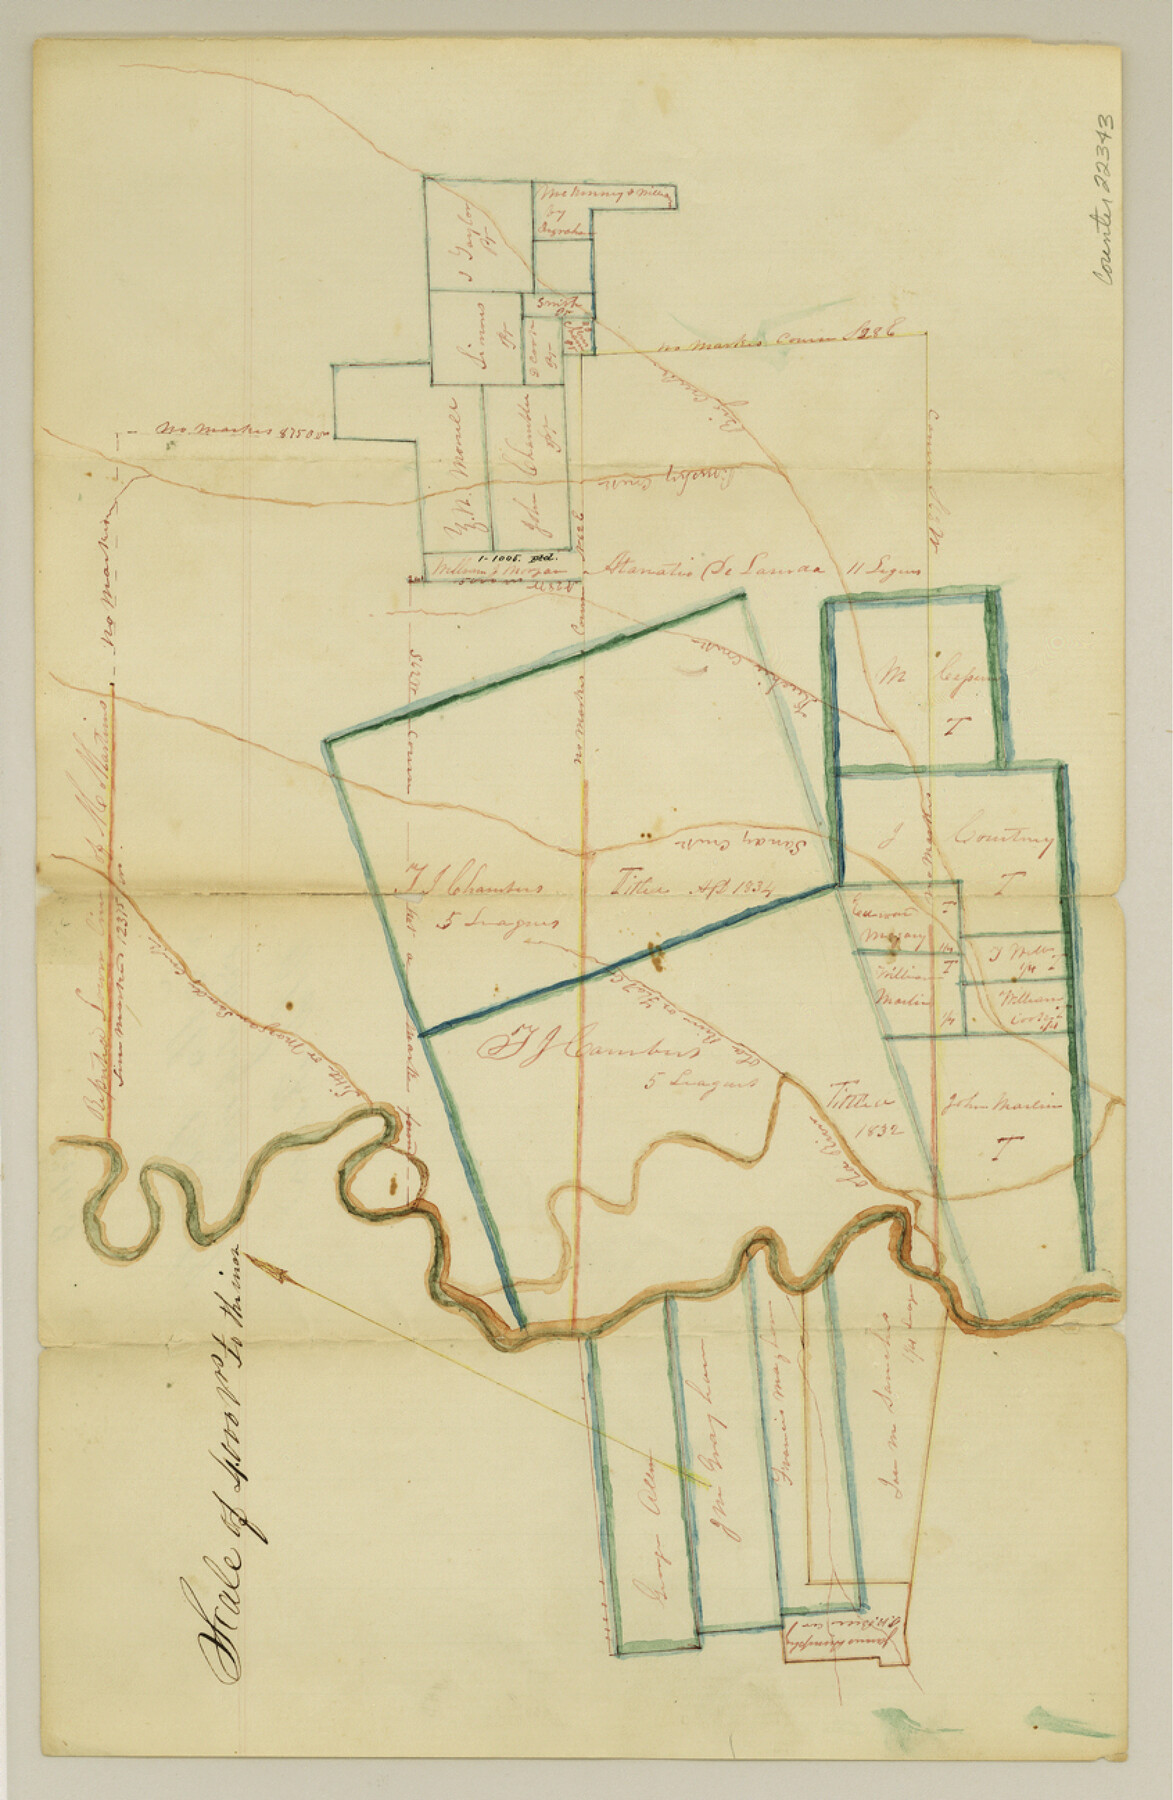 22343, Falls County Sketch File 9, General Map Collection